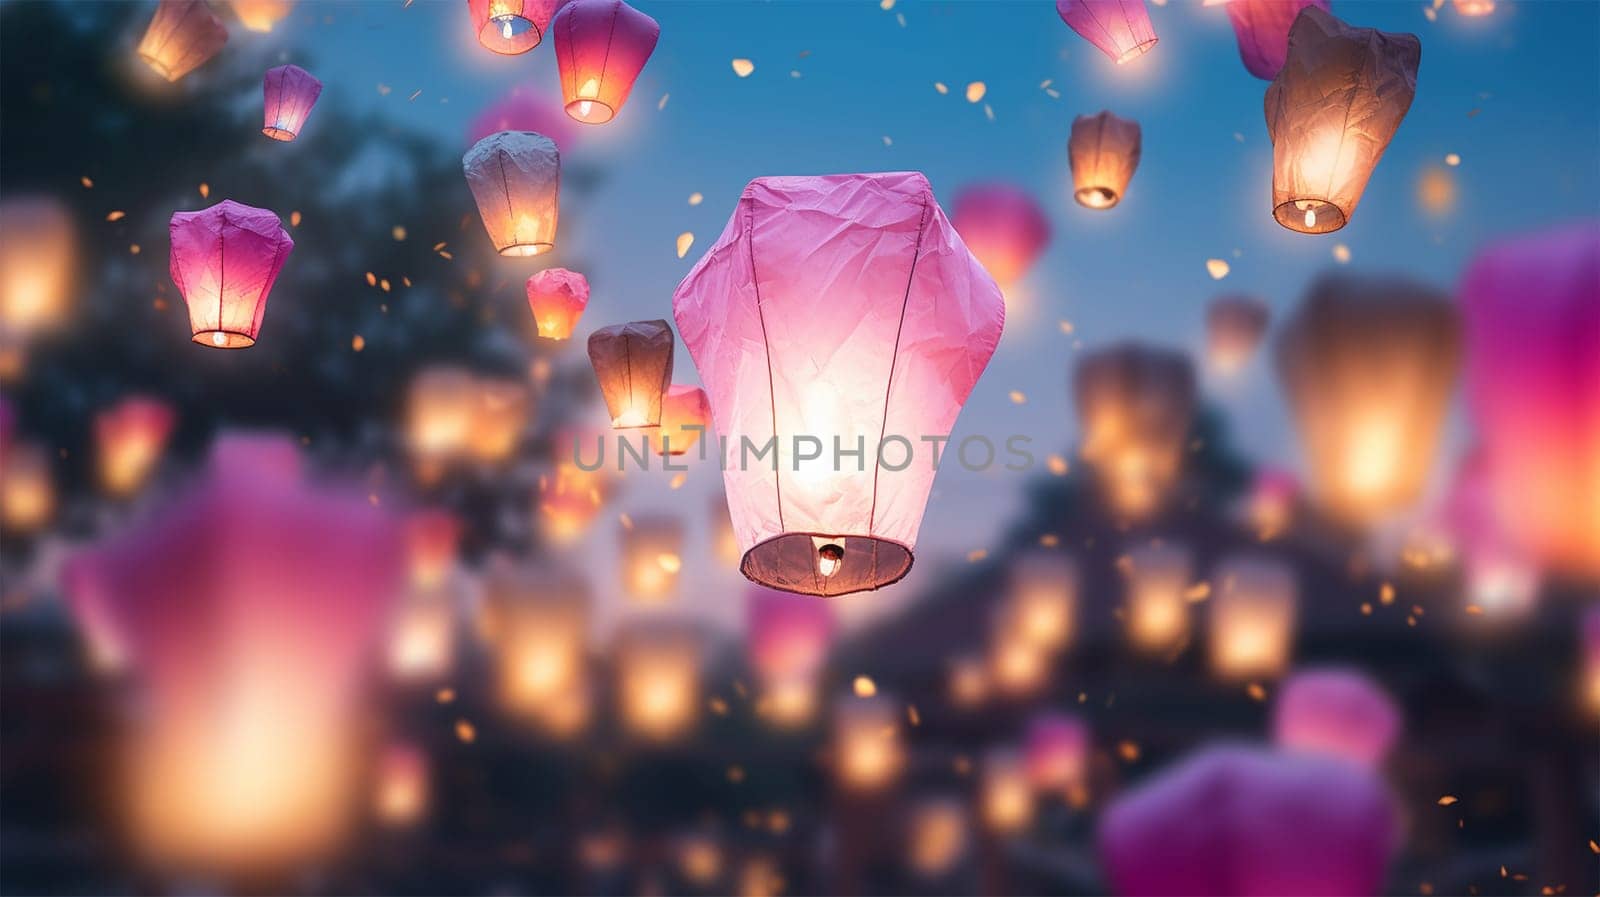 Lantern Festival background, Shangyuan Festival China. Magical flying lanterns in the colorful sky. beautiful lights sparkling. Chinese festive background beauty